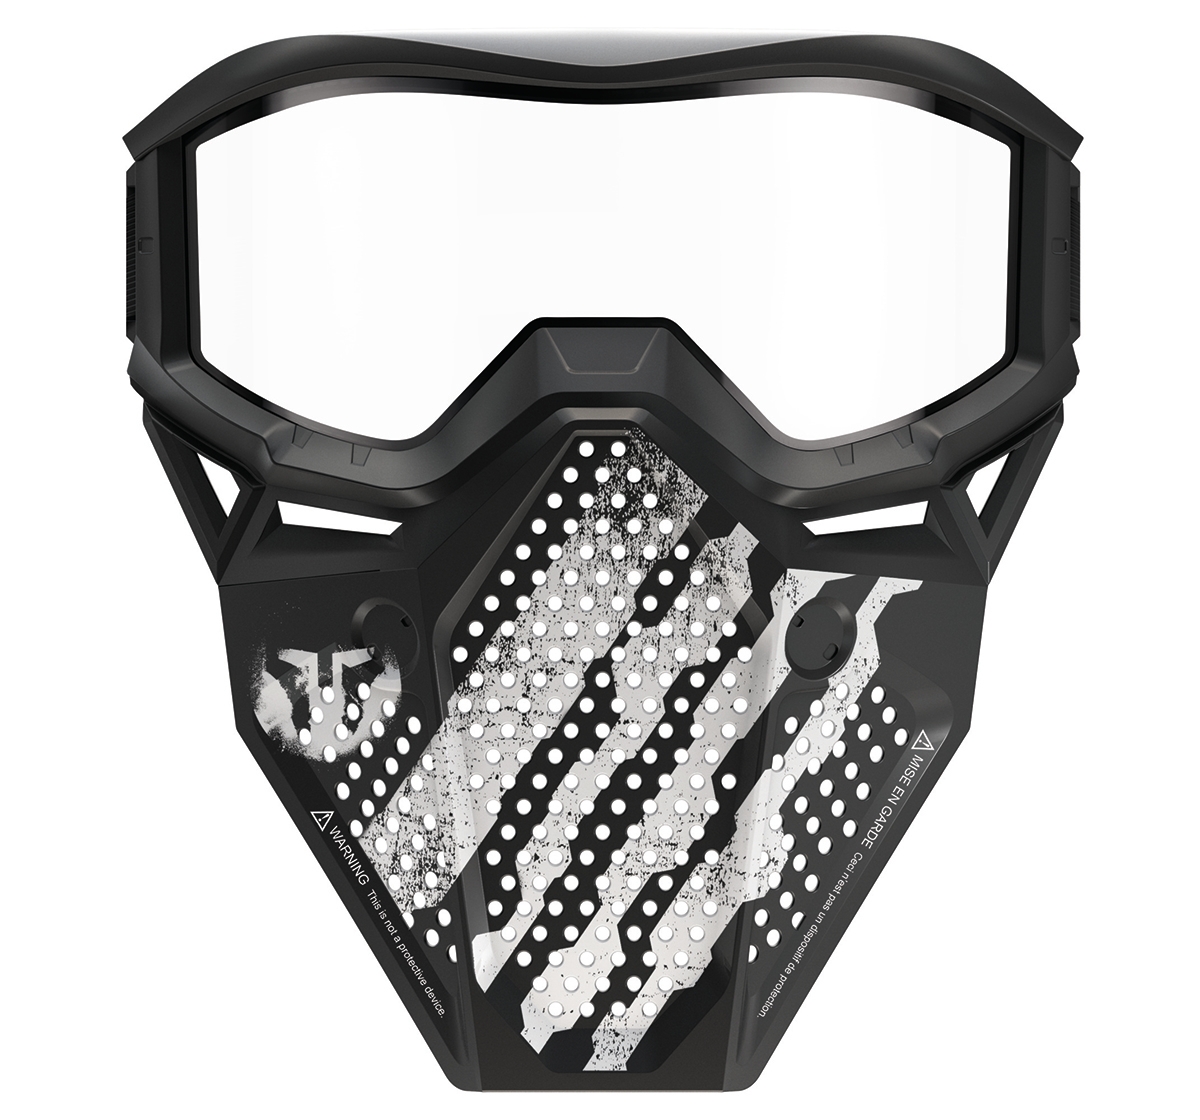 NERF Rival Phantom Corps Face Mask, White, 14Y+